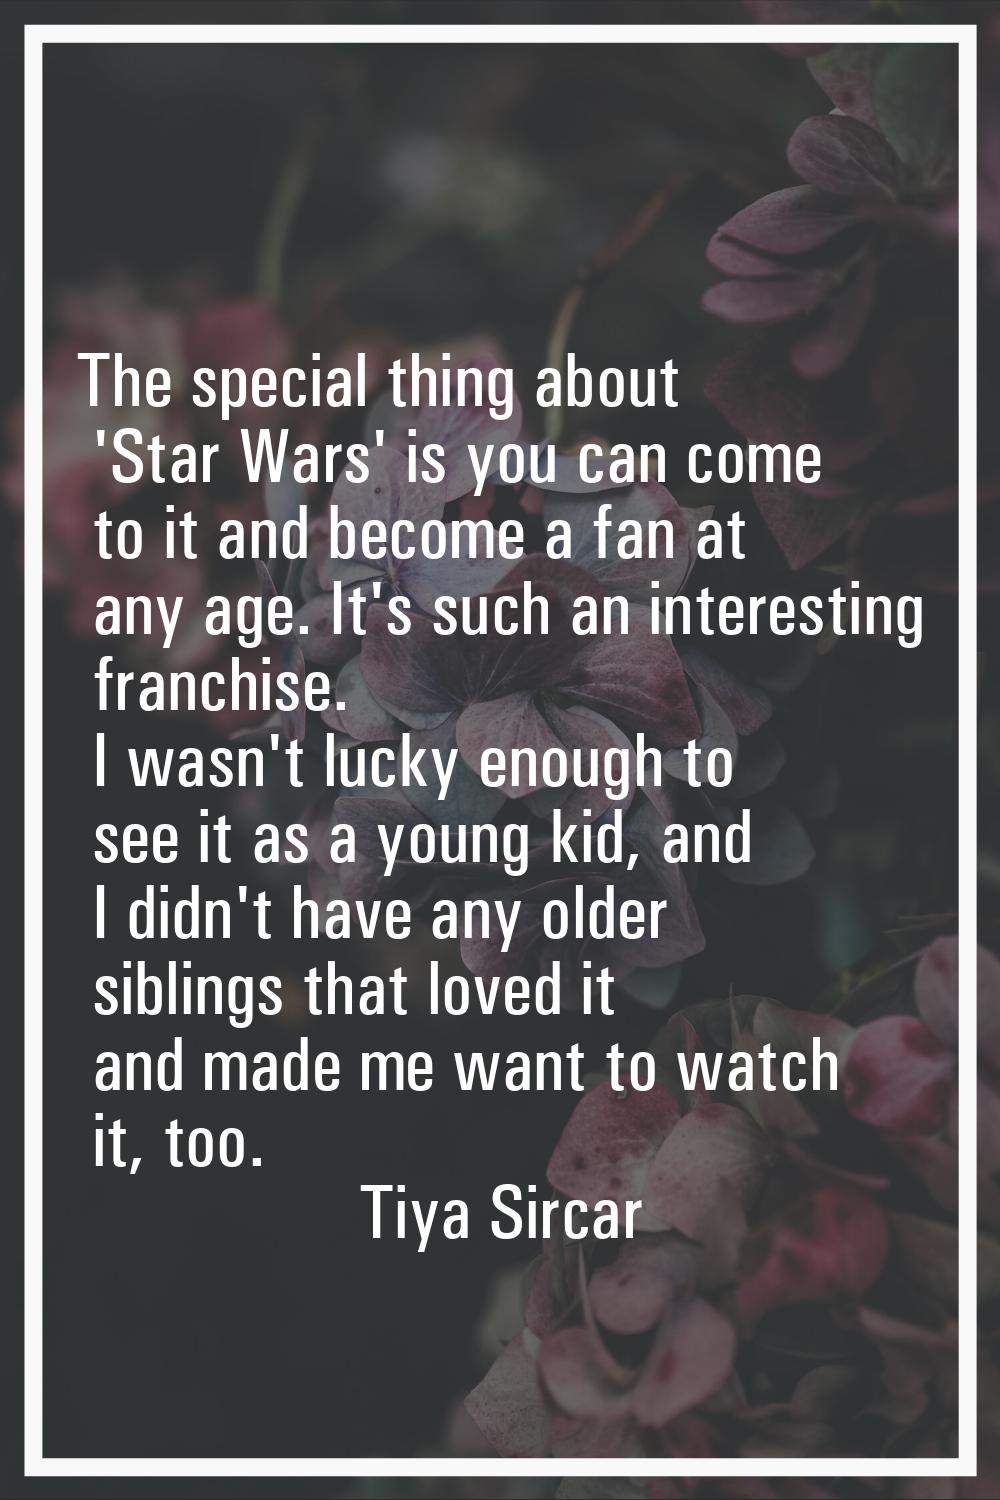 The special thing about 'Star Wars' is you can come to it and become a fan at any age. It's such an